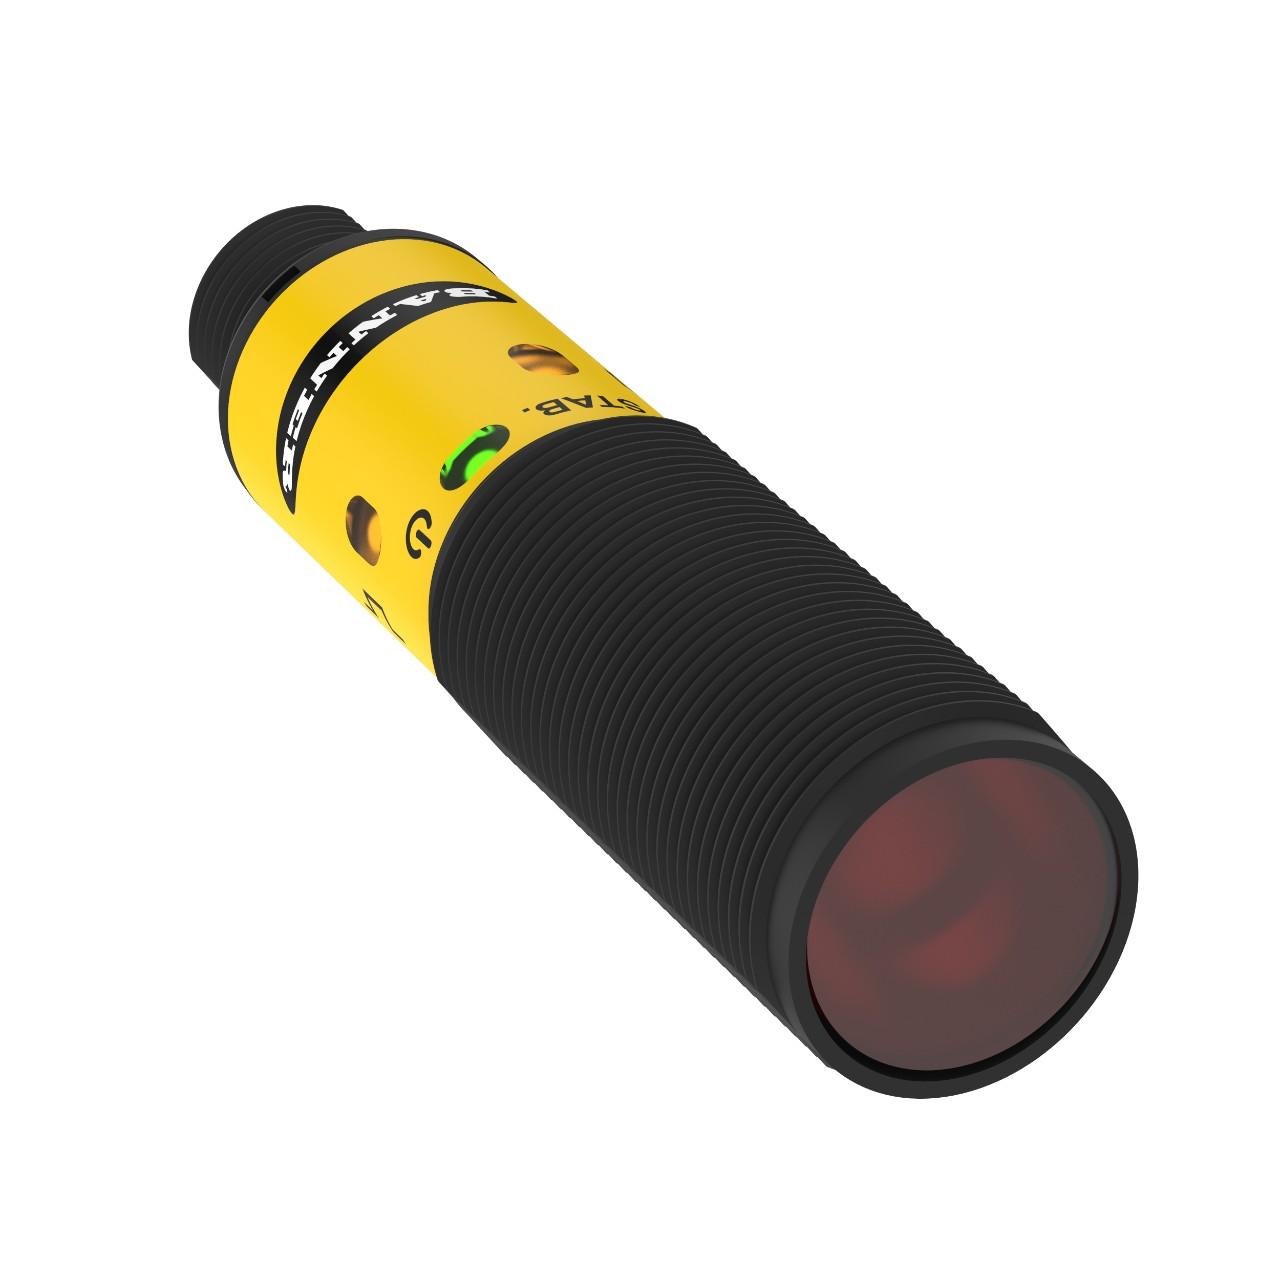 Banner S18-2VPFF100-Q8 Banner Engineering S18-2VPFF100-Q8 is a fixed-field photo-electric sensor within the S18-2 series, featuring a background suppression system. It is constructed with a thermoplastic housing and an acrylic lens. This sensor is pre-equipped with a 4-pin Euro-style M12 connector for connectivity. It operates on a supply voltage range of 10Vdc to 30Vdc, with nominal voltages of 12Vdc and 24Vdc. Designed for a wide range of ambient air temperatures, it functions between -40 and +70 degrees Celsius. The S18-2VPFF100-Q8 offers an IP67 degree of protection, making it suitable for various environmental conditions. Its M18 cylindrical threaded/barrel shape facilitates easy installation. The sensor provides one digital output via a PNP transistor and has a sensing distance of 100mm. It emits visible red light with a wavelength of 624 nm and responds in 1.5ms. Additionally, it supports both Light-ON and Dark-ON operating modes.